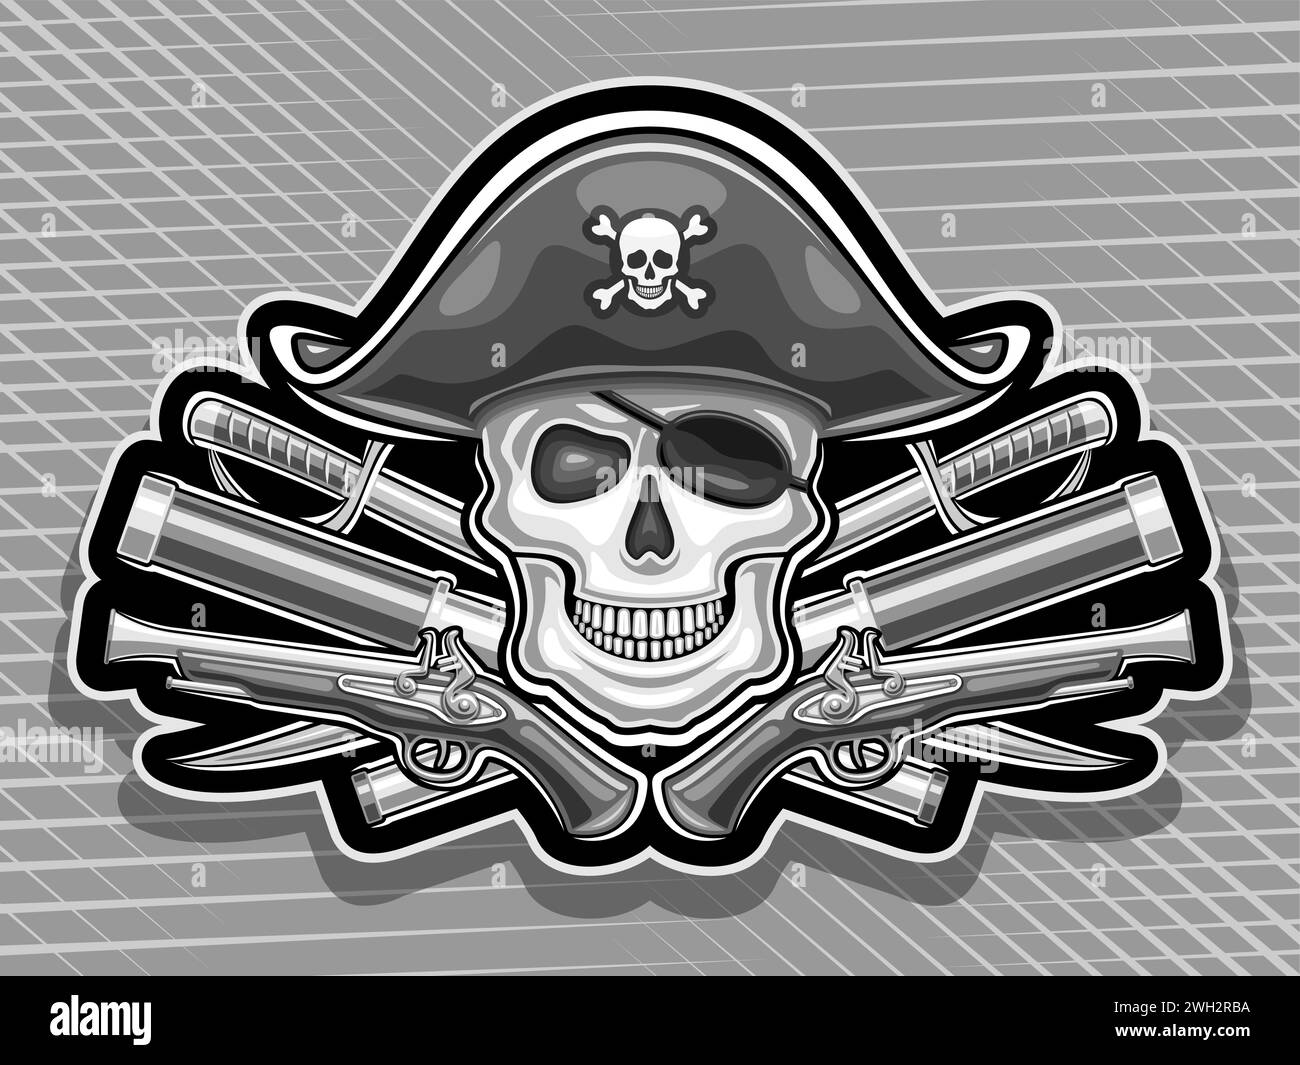 Vector logo for Pirate Skull, horizontal poster with illustration of smiling skull in sea hat and pirate eyepatch, decorative label with art design pi Stock Vector